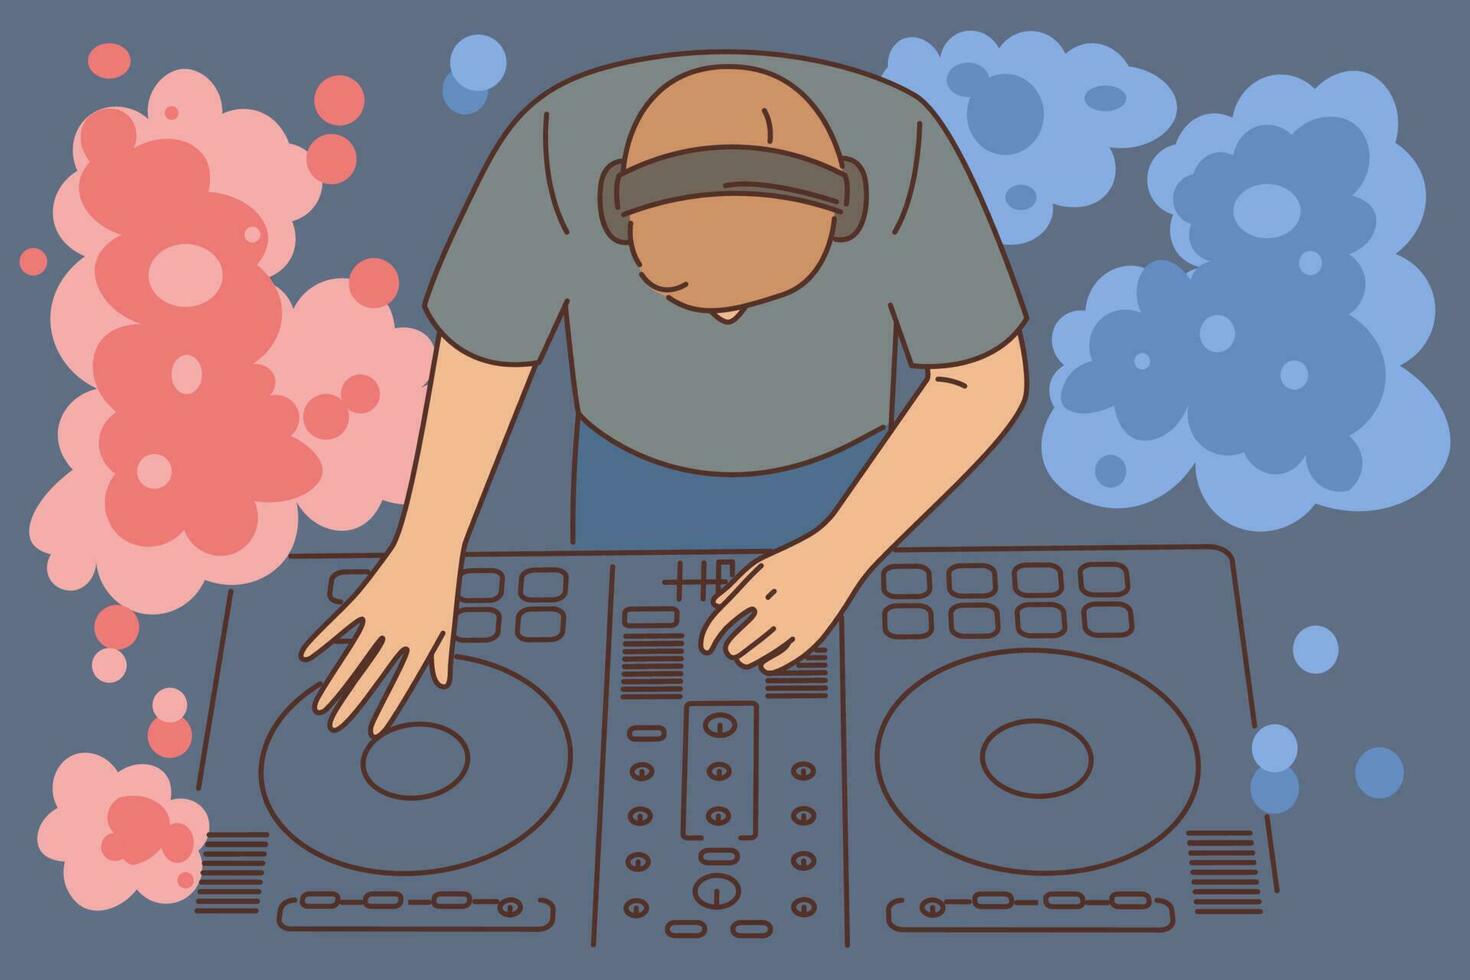 Nightclub DJ uses mixing console to play music from vinyl records to party goers. DJ guy with musical equipment to create energetic tracks during dance festival or disco in entertainment club vector